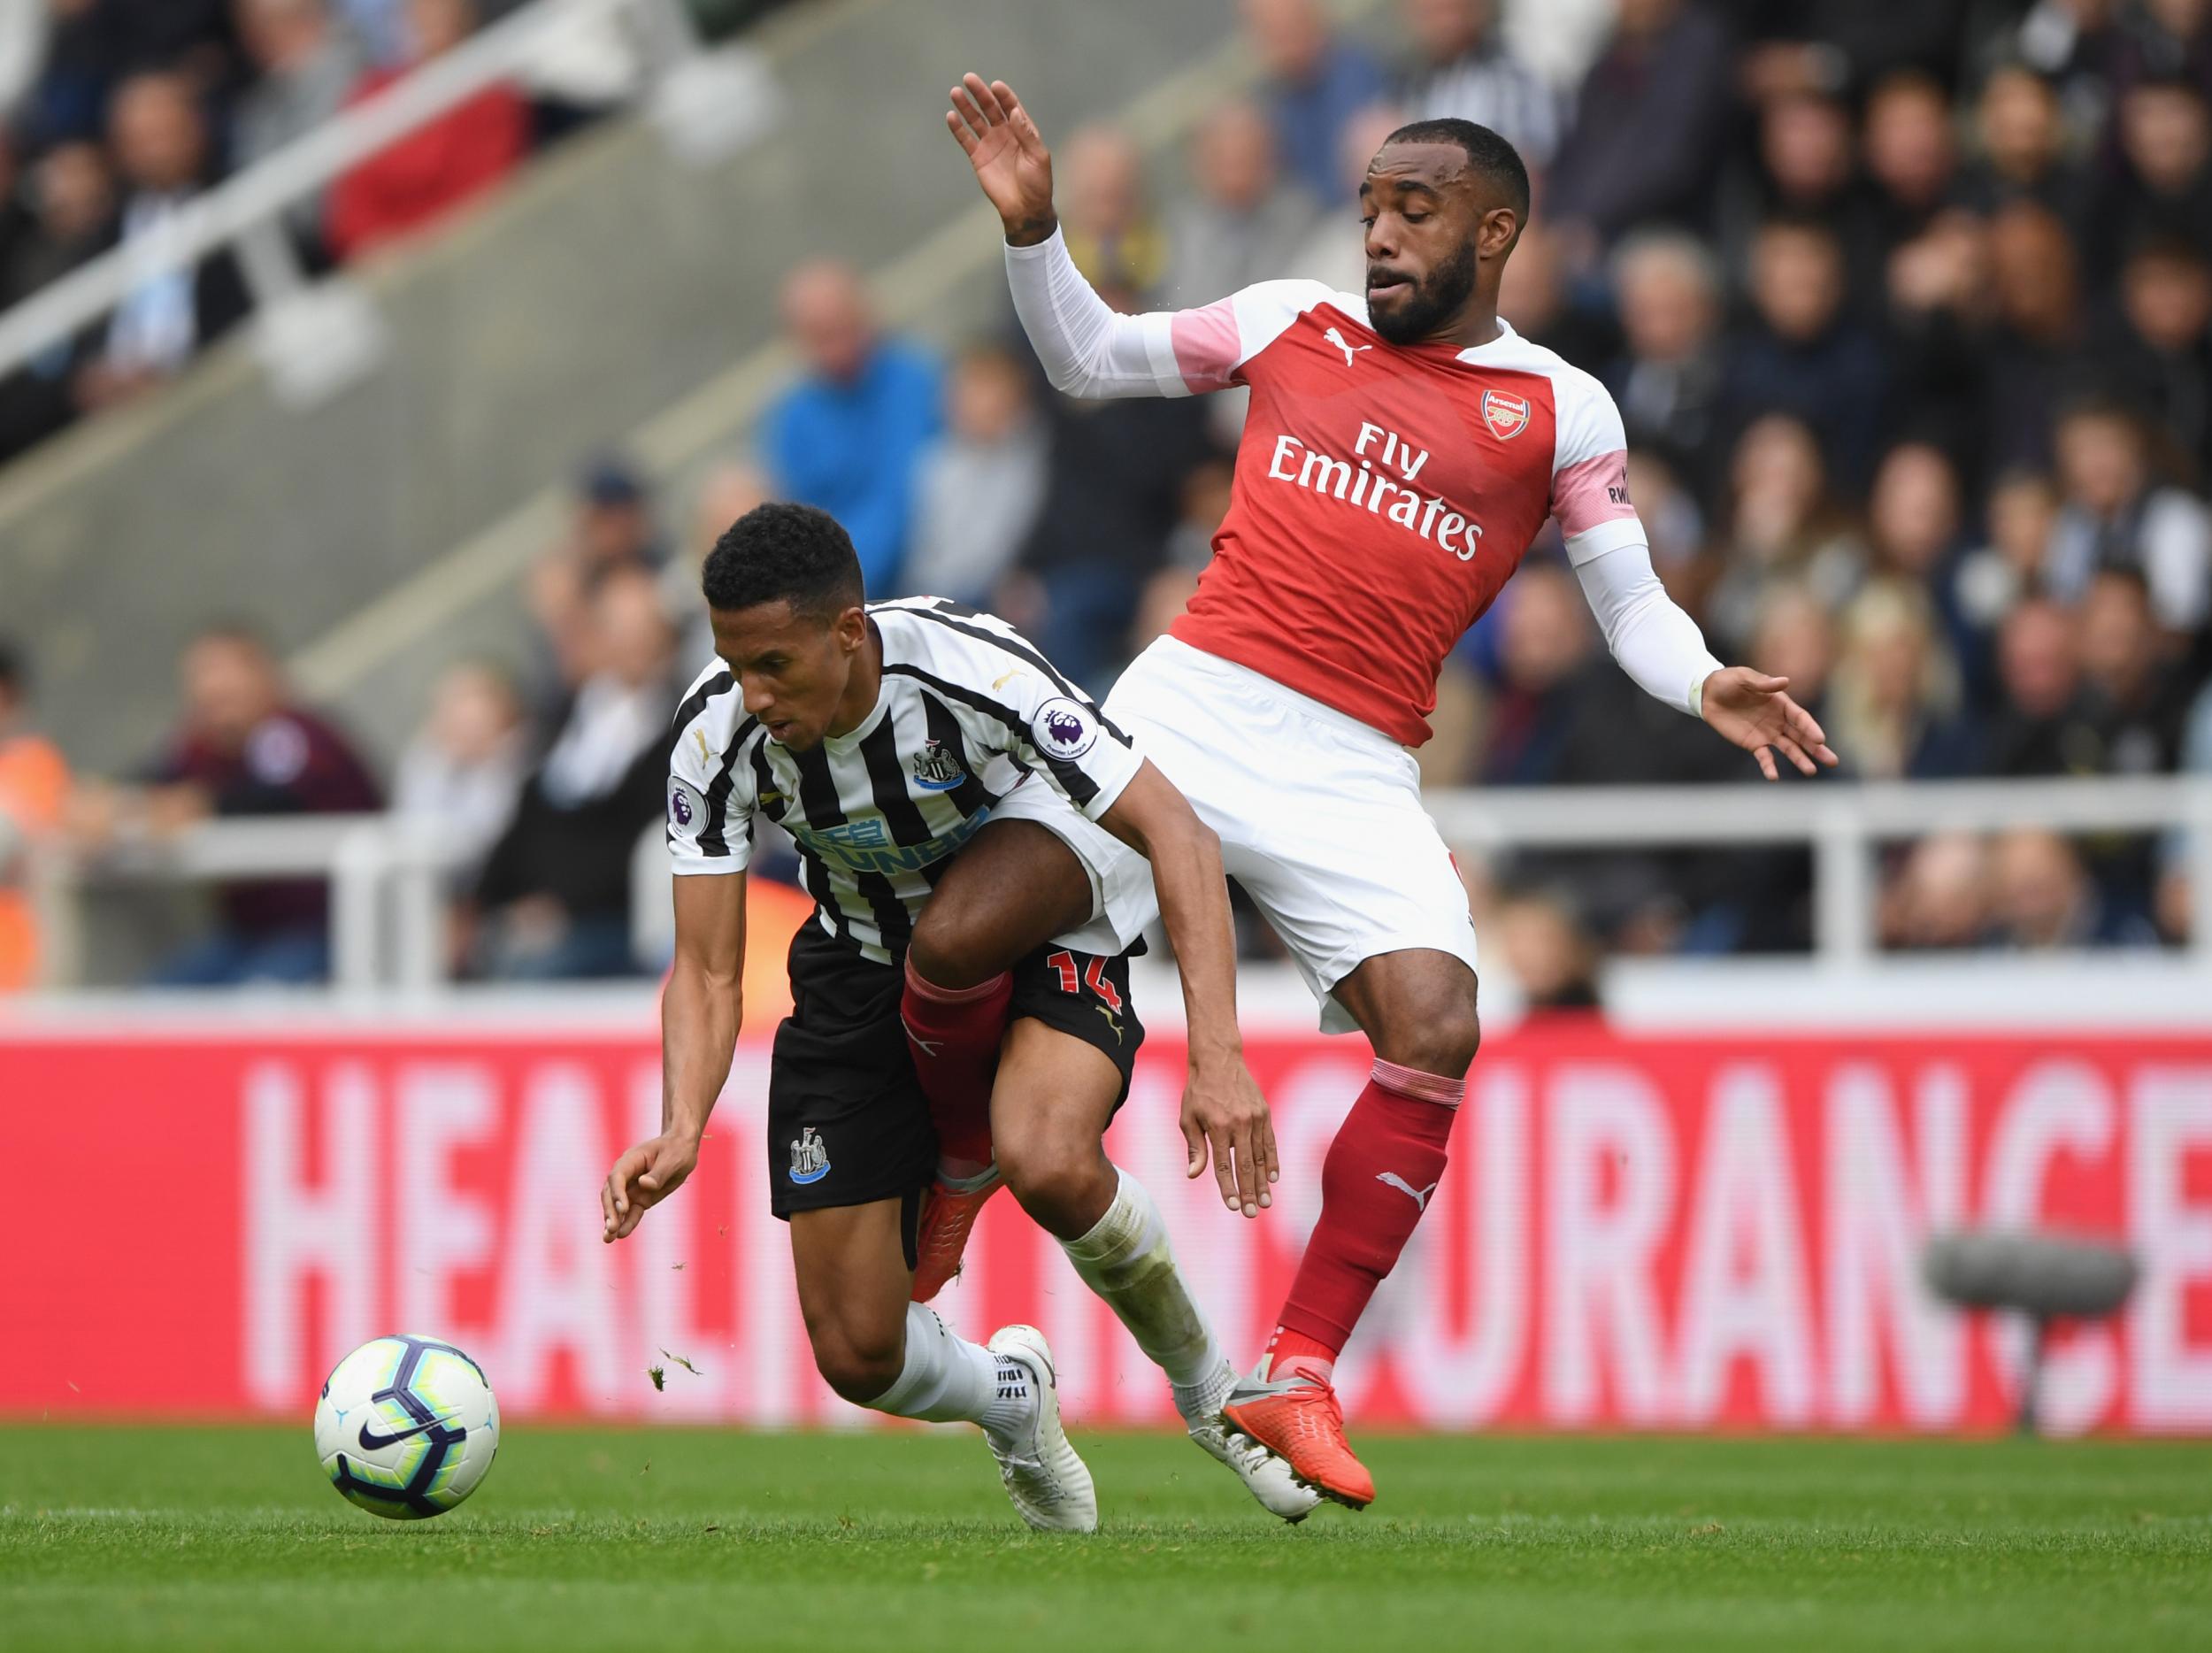 Newcastle vs Arsenal live stream: How to watch Premier League match